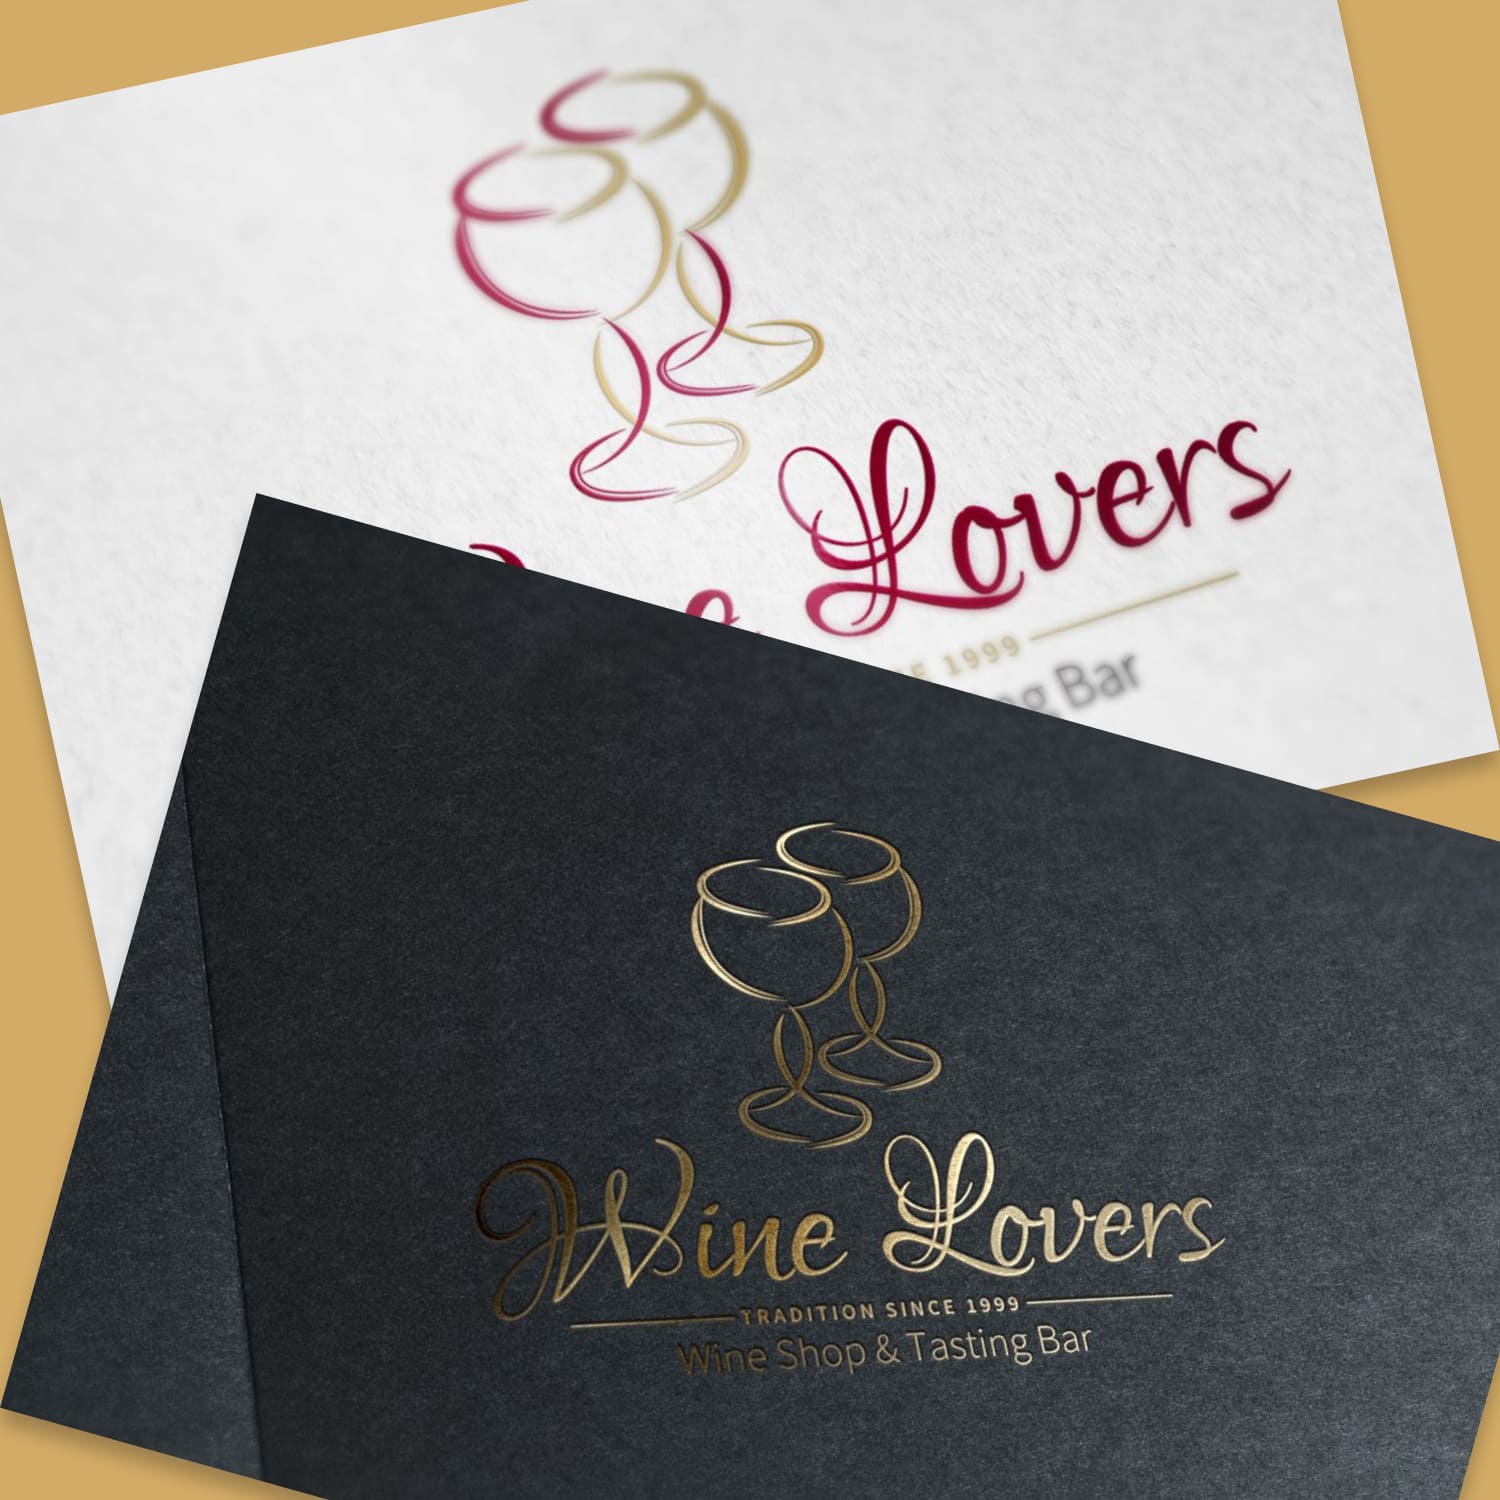 Perfect for business cards, company stationery, menu and others!